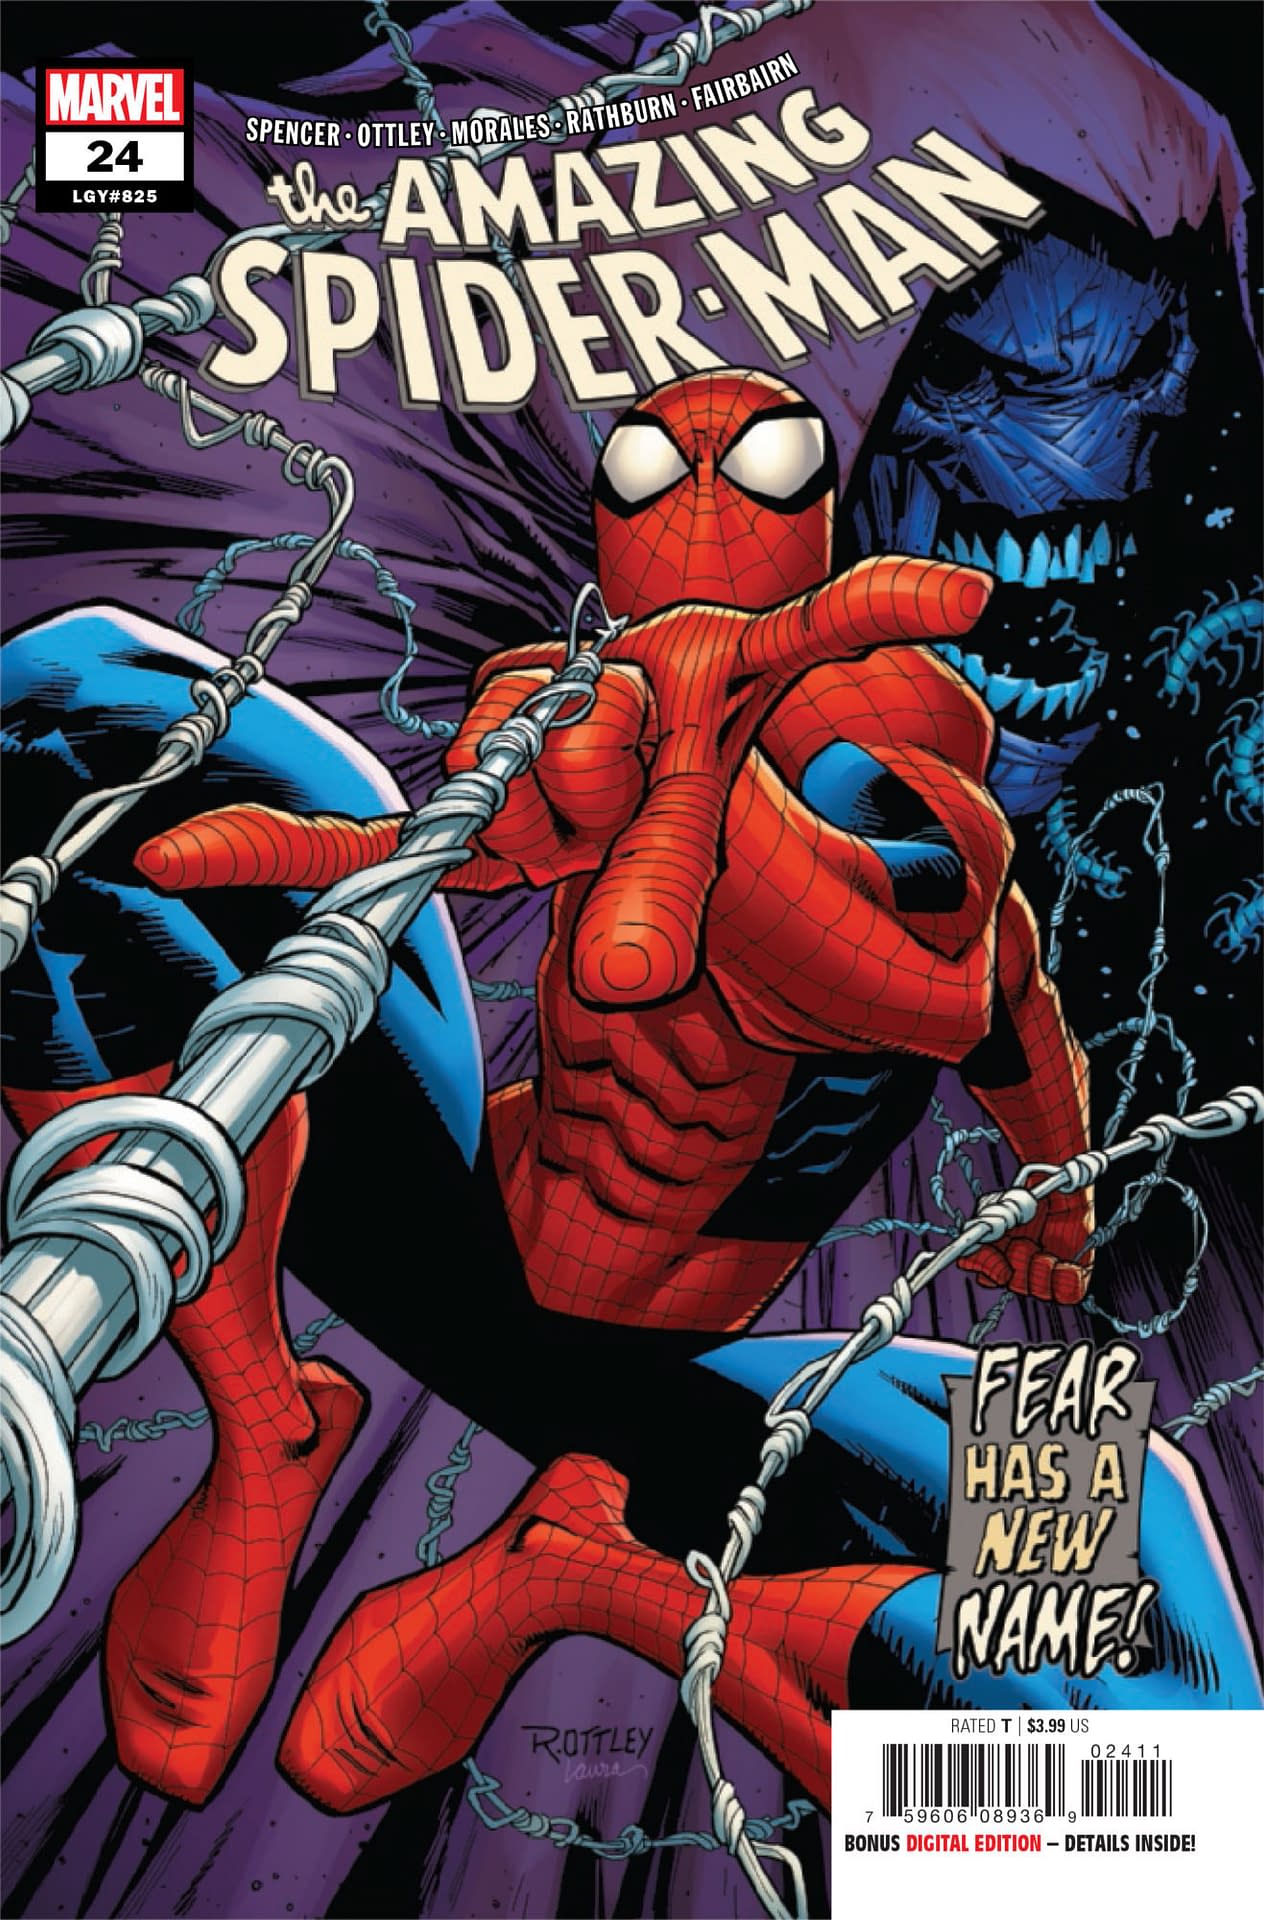 Spidey Gets "Romantic" with MJ in Amazing Spider-MAn #24 (Preview)